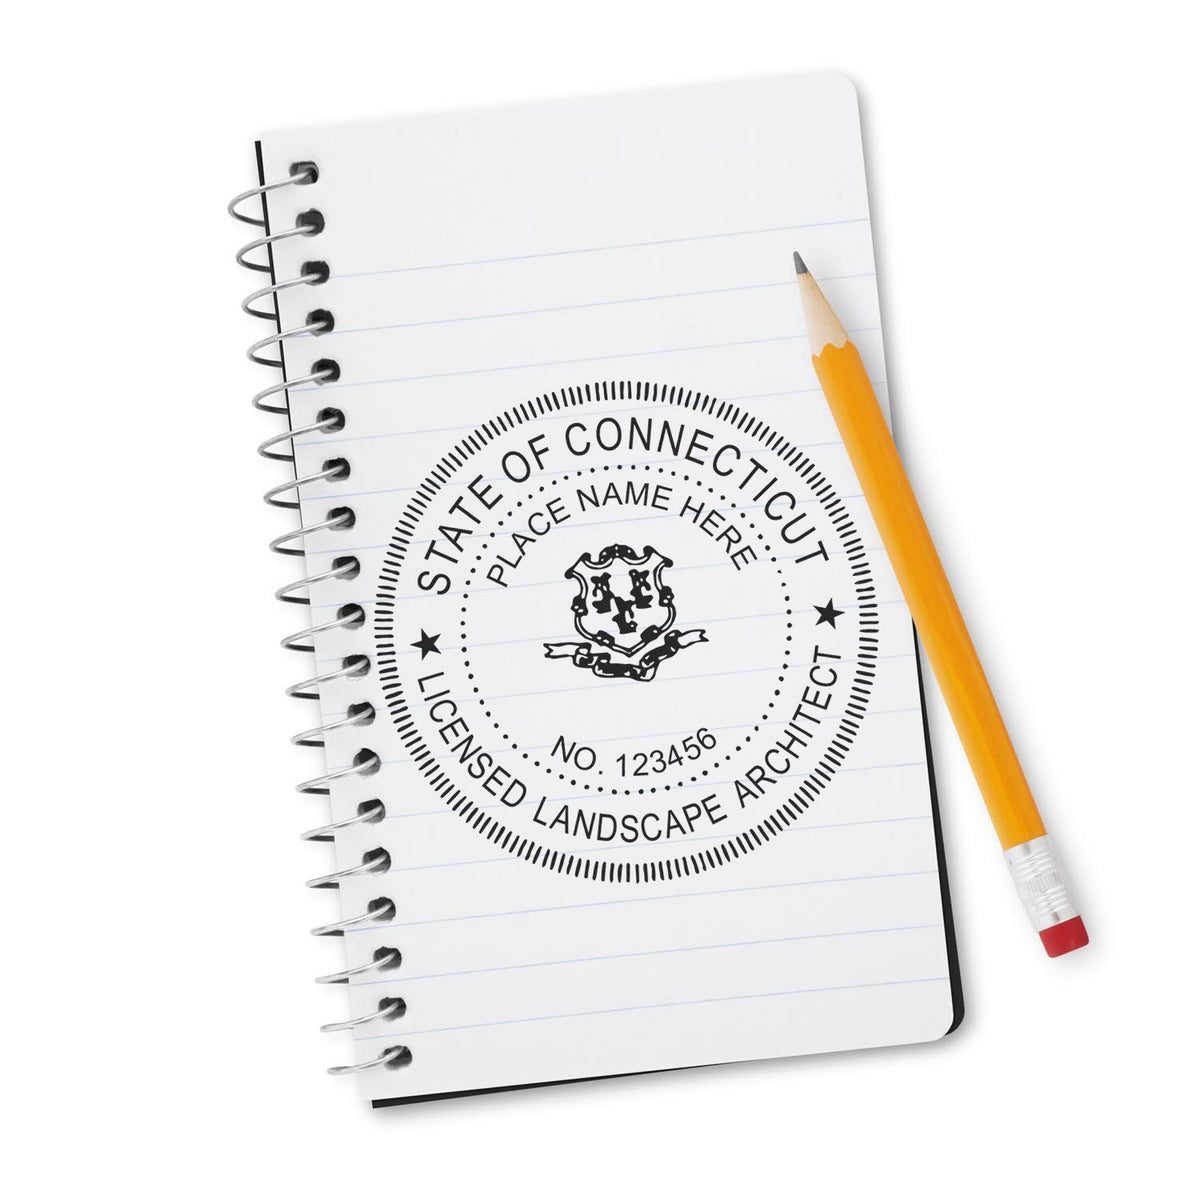 This paper is stamped with a sample imprint of the Connecticut Landscape Architectural Seal Stamp, signifying its quality and reliability.